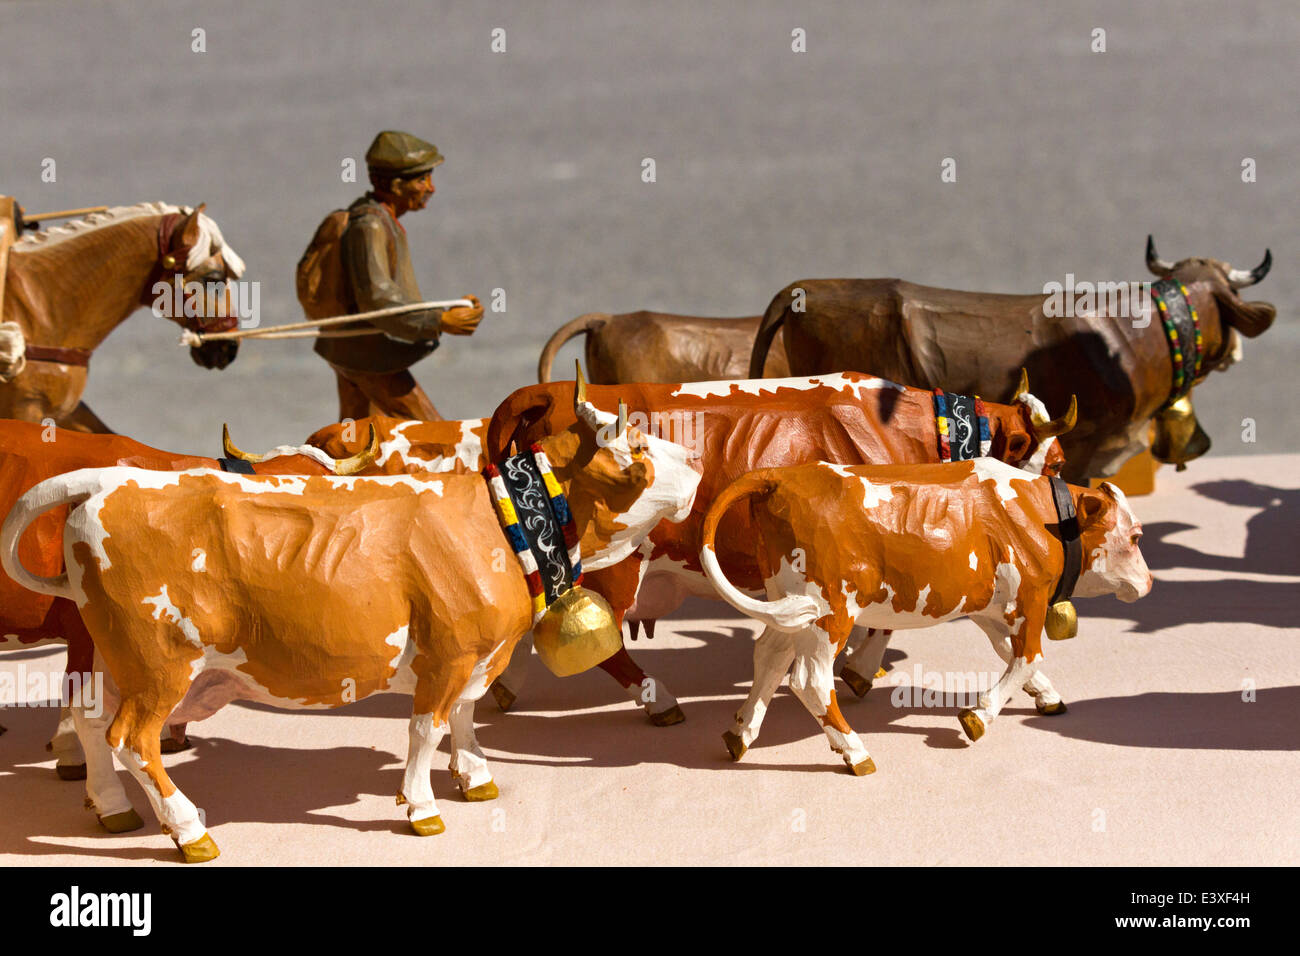 Hand carved wooden models of dairy cows, Upper Bavaria, Germany, Europe. Stock Photo